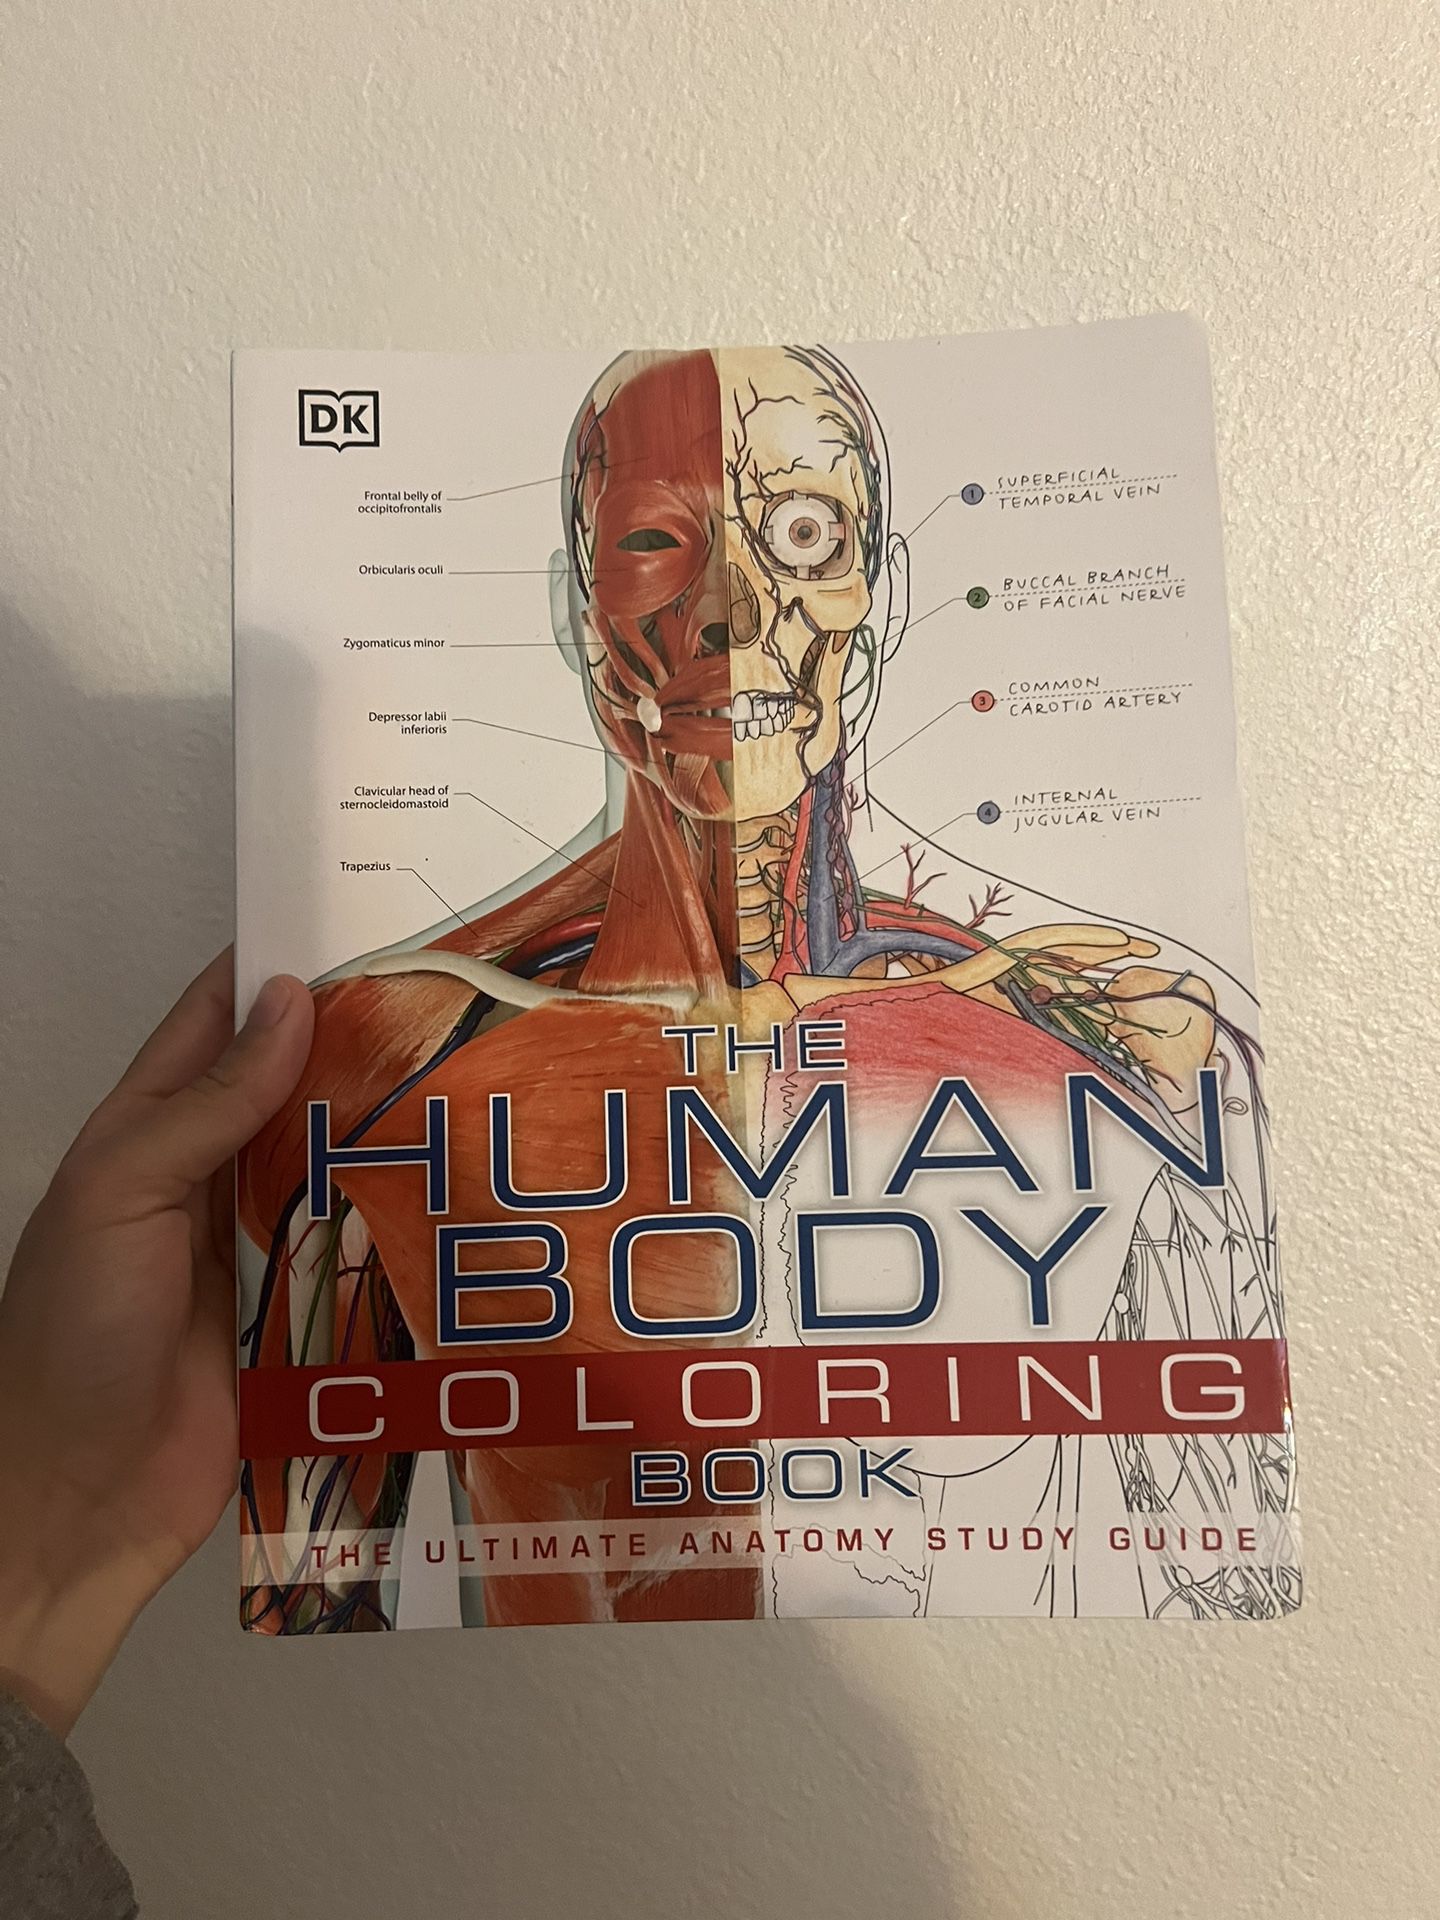 The Human Body Coloring Book: The Ultimate Anatomy Study Guide (DK Human Body Guides)